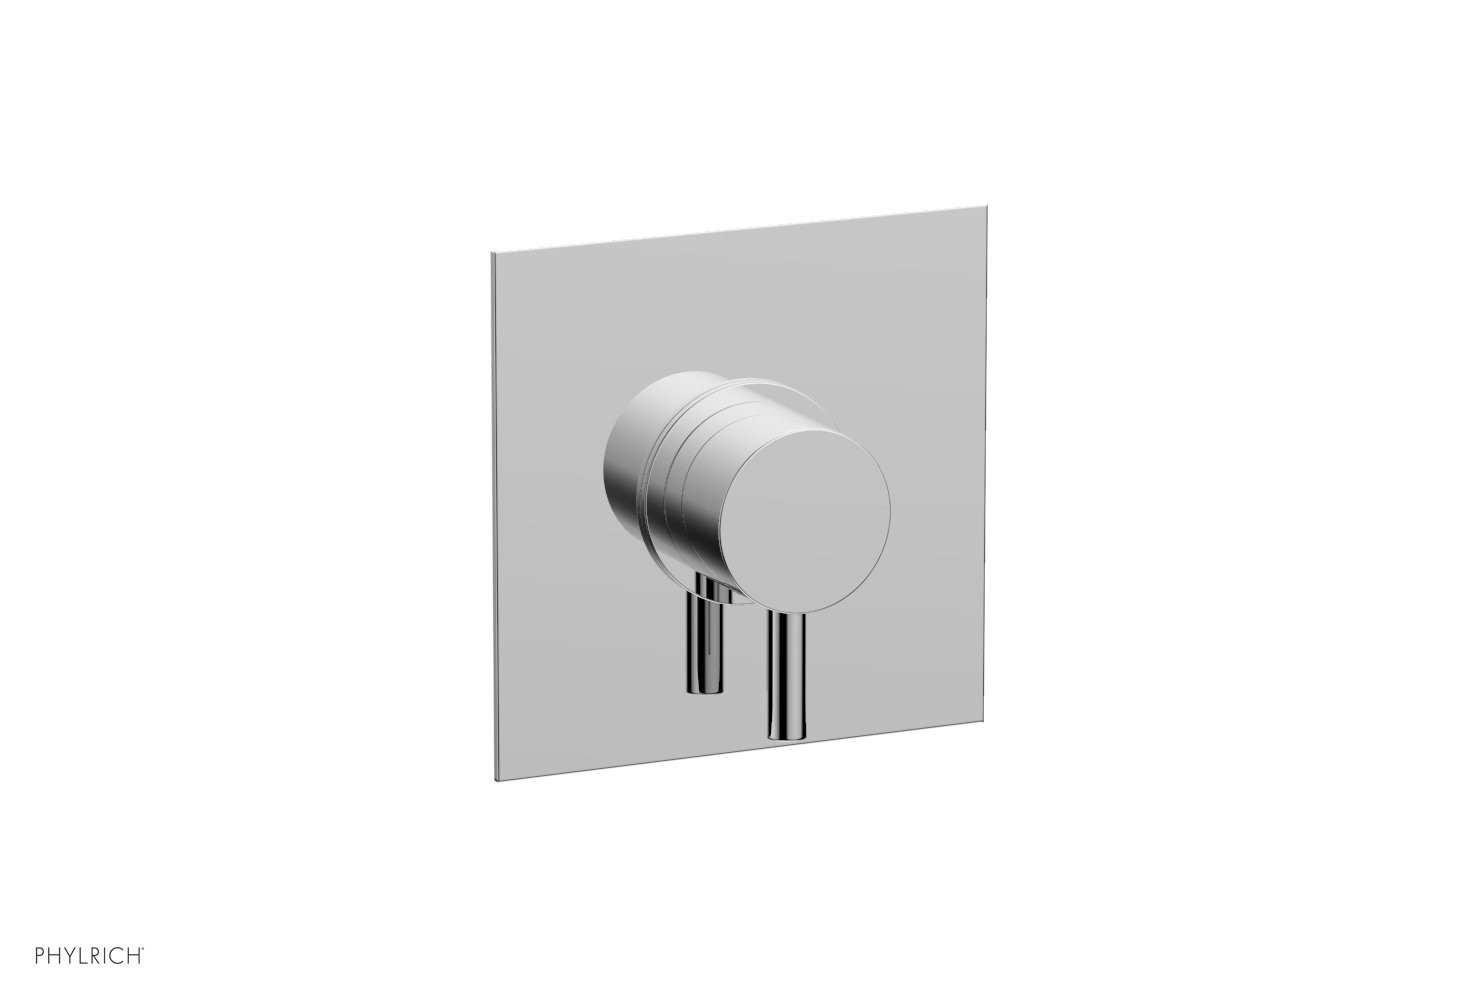 PHYLRICH 4-179 BASIC II WALL MOUNT LEVER HANDLE MINI THERMOSTATIC SHOWER TRIM